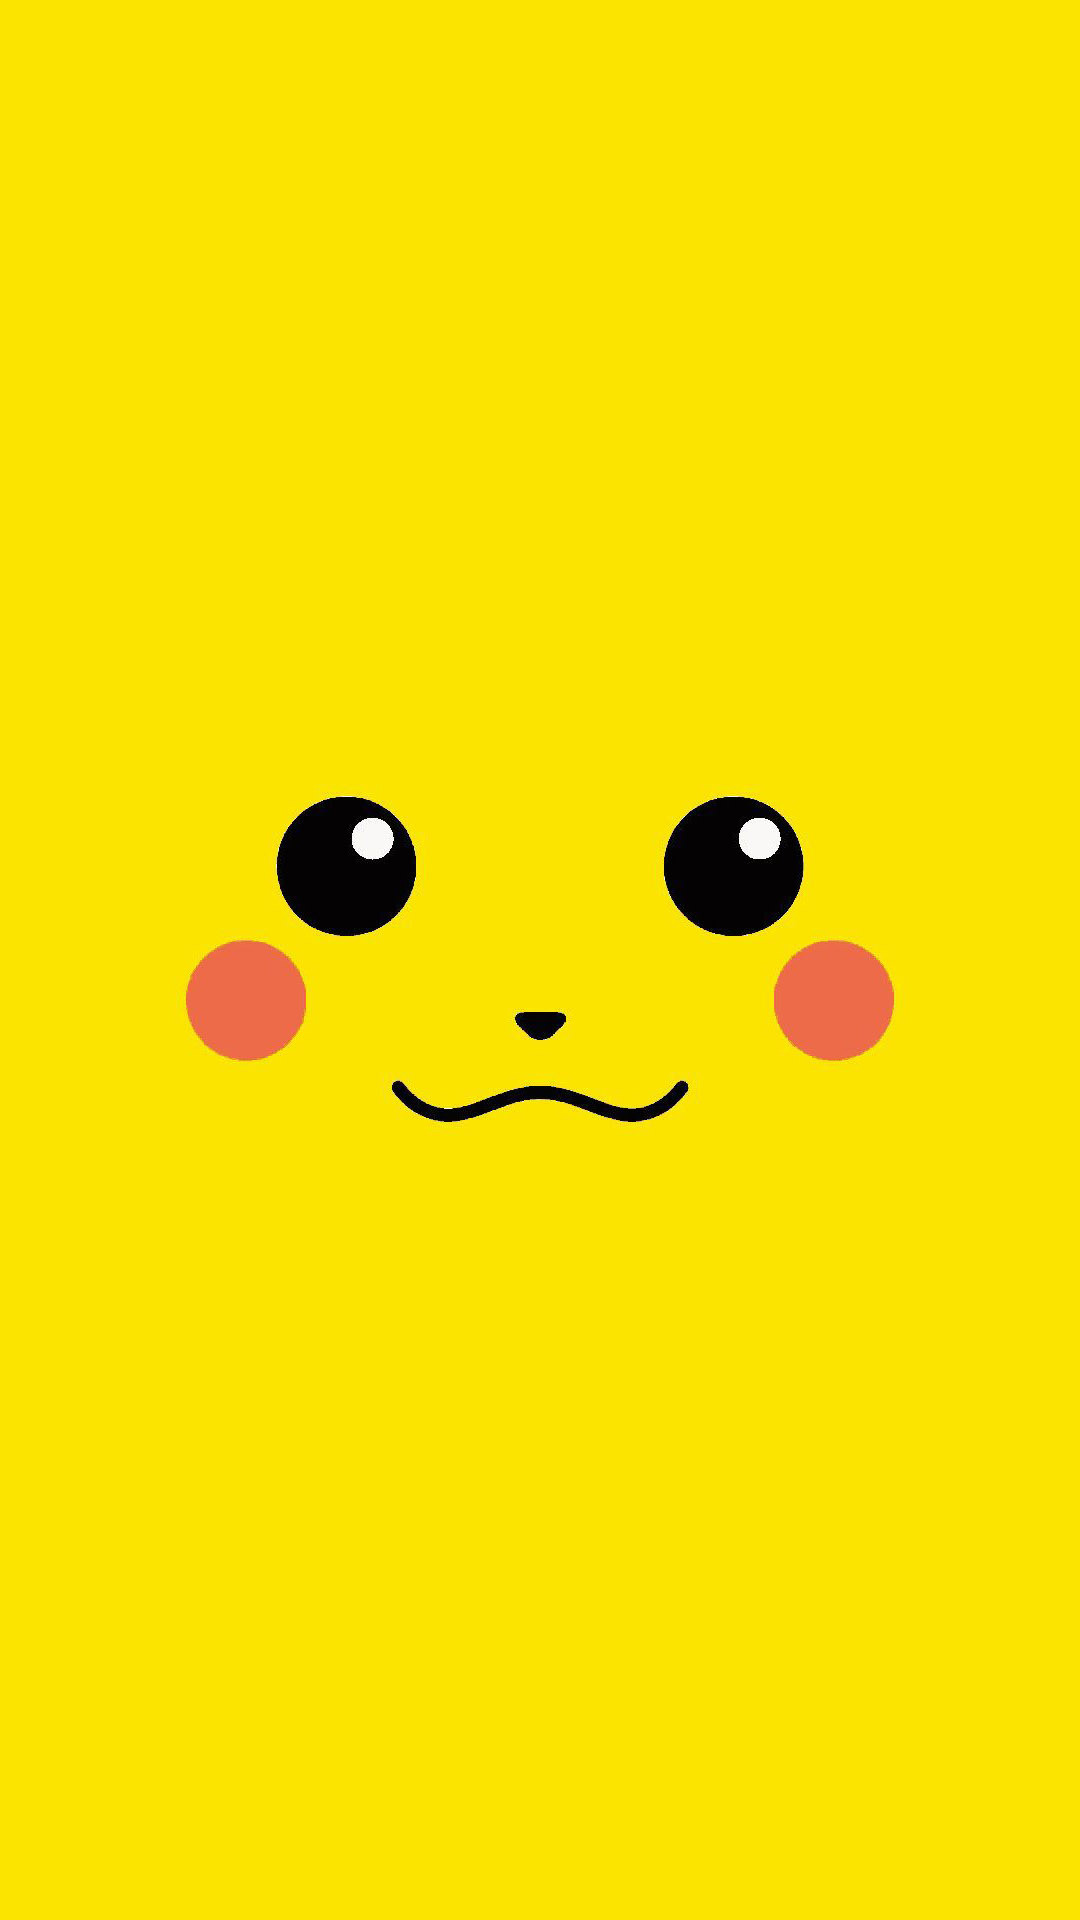 Cute Pokemon iPhone Wallpapers HD Free download 